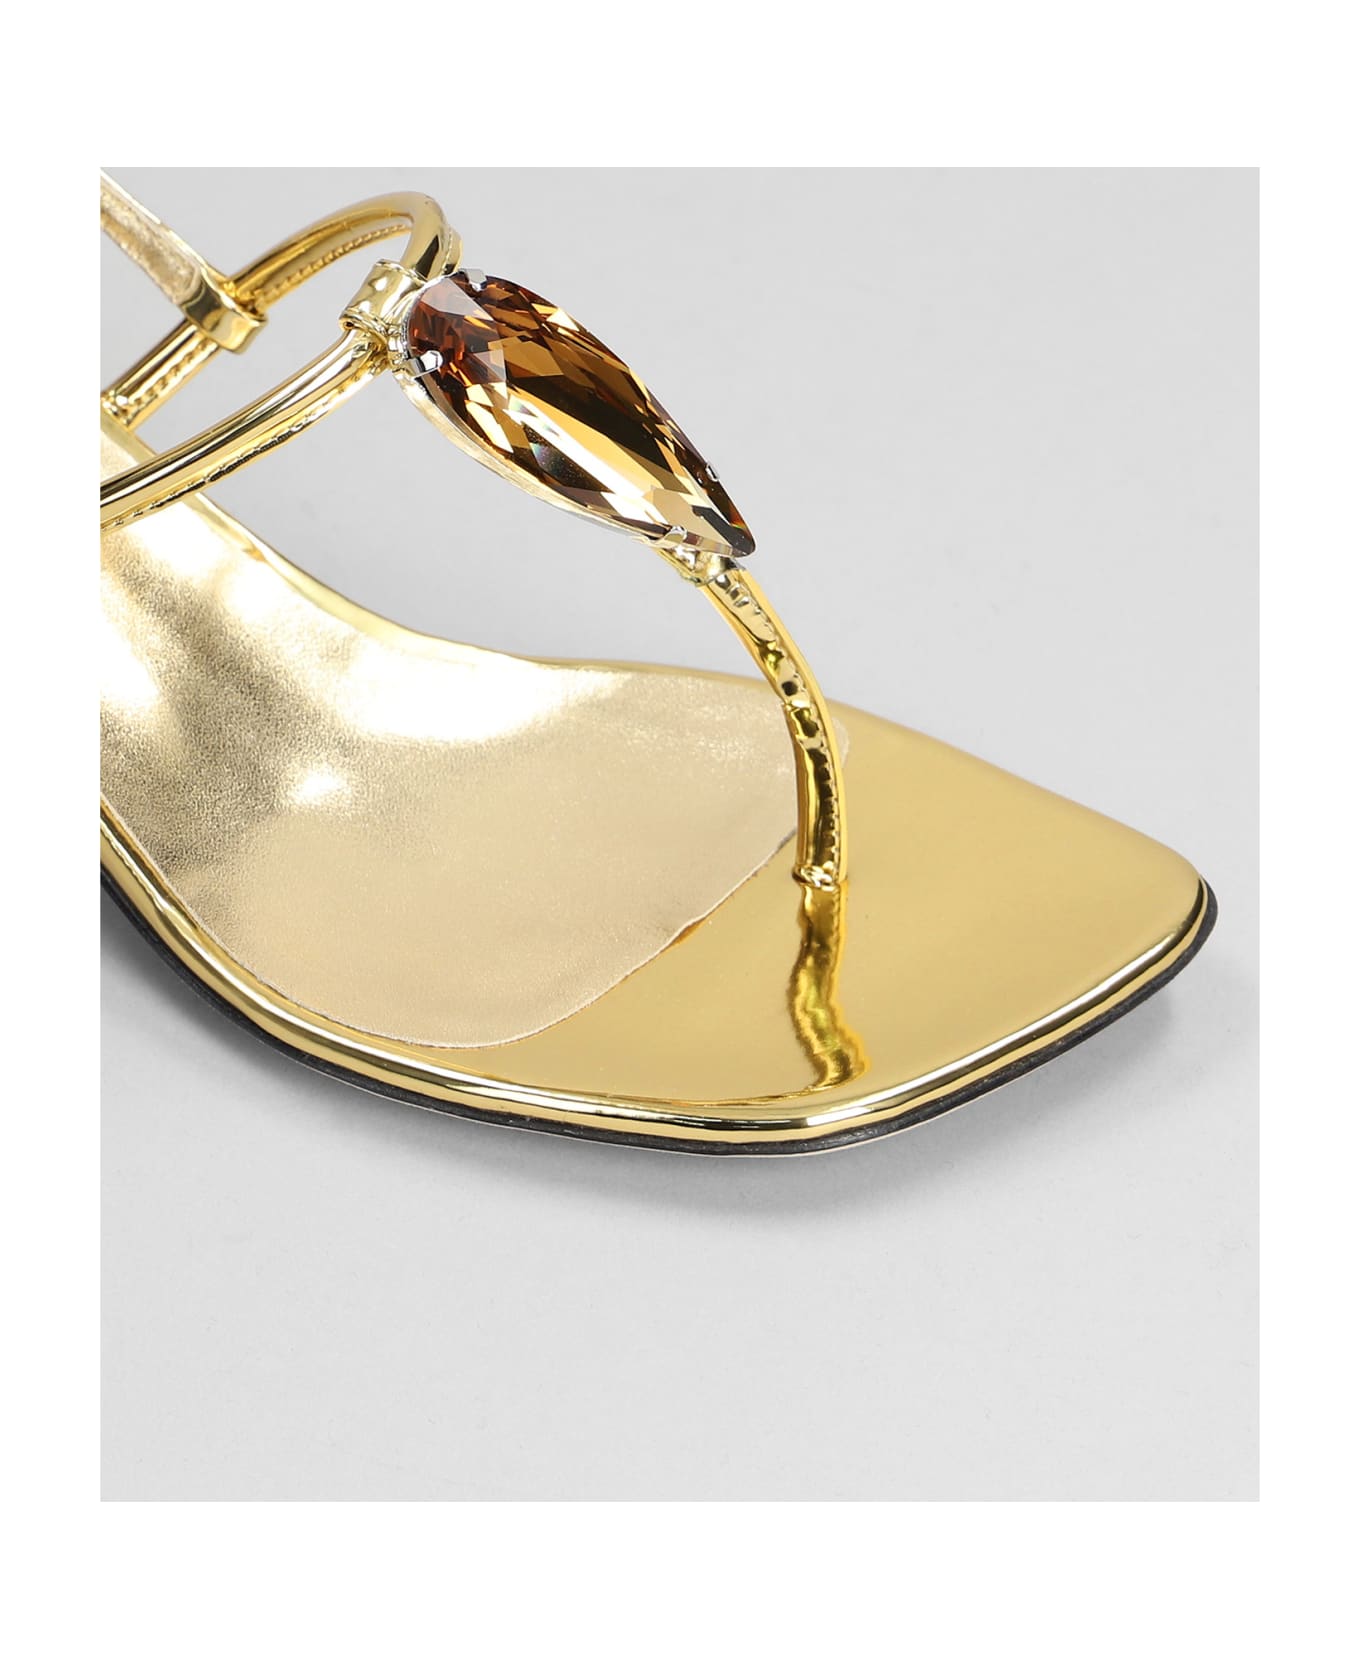 Giuseppe Zanotti Anthonia Sandals In Gold Synthetic Leather - gold サンダル